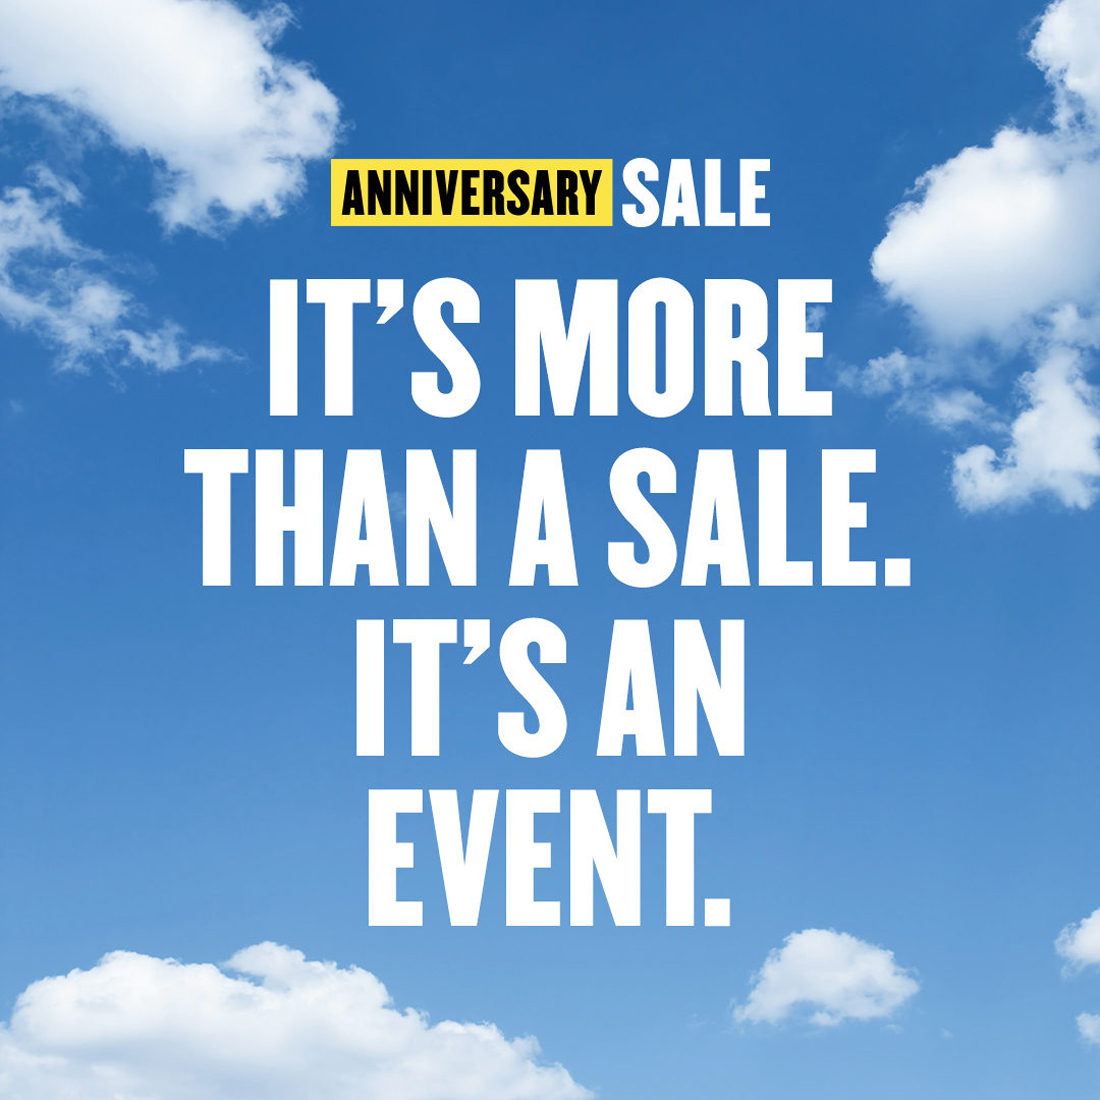 The Nordstrom Anniversary Sale Starts Friday, July 19